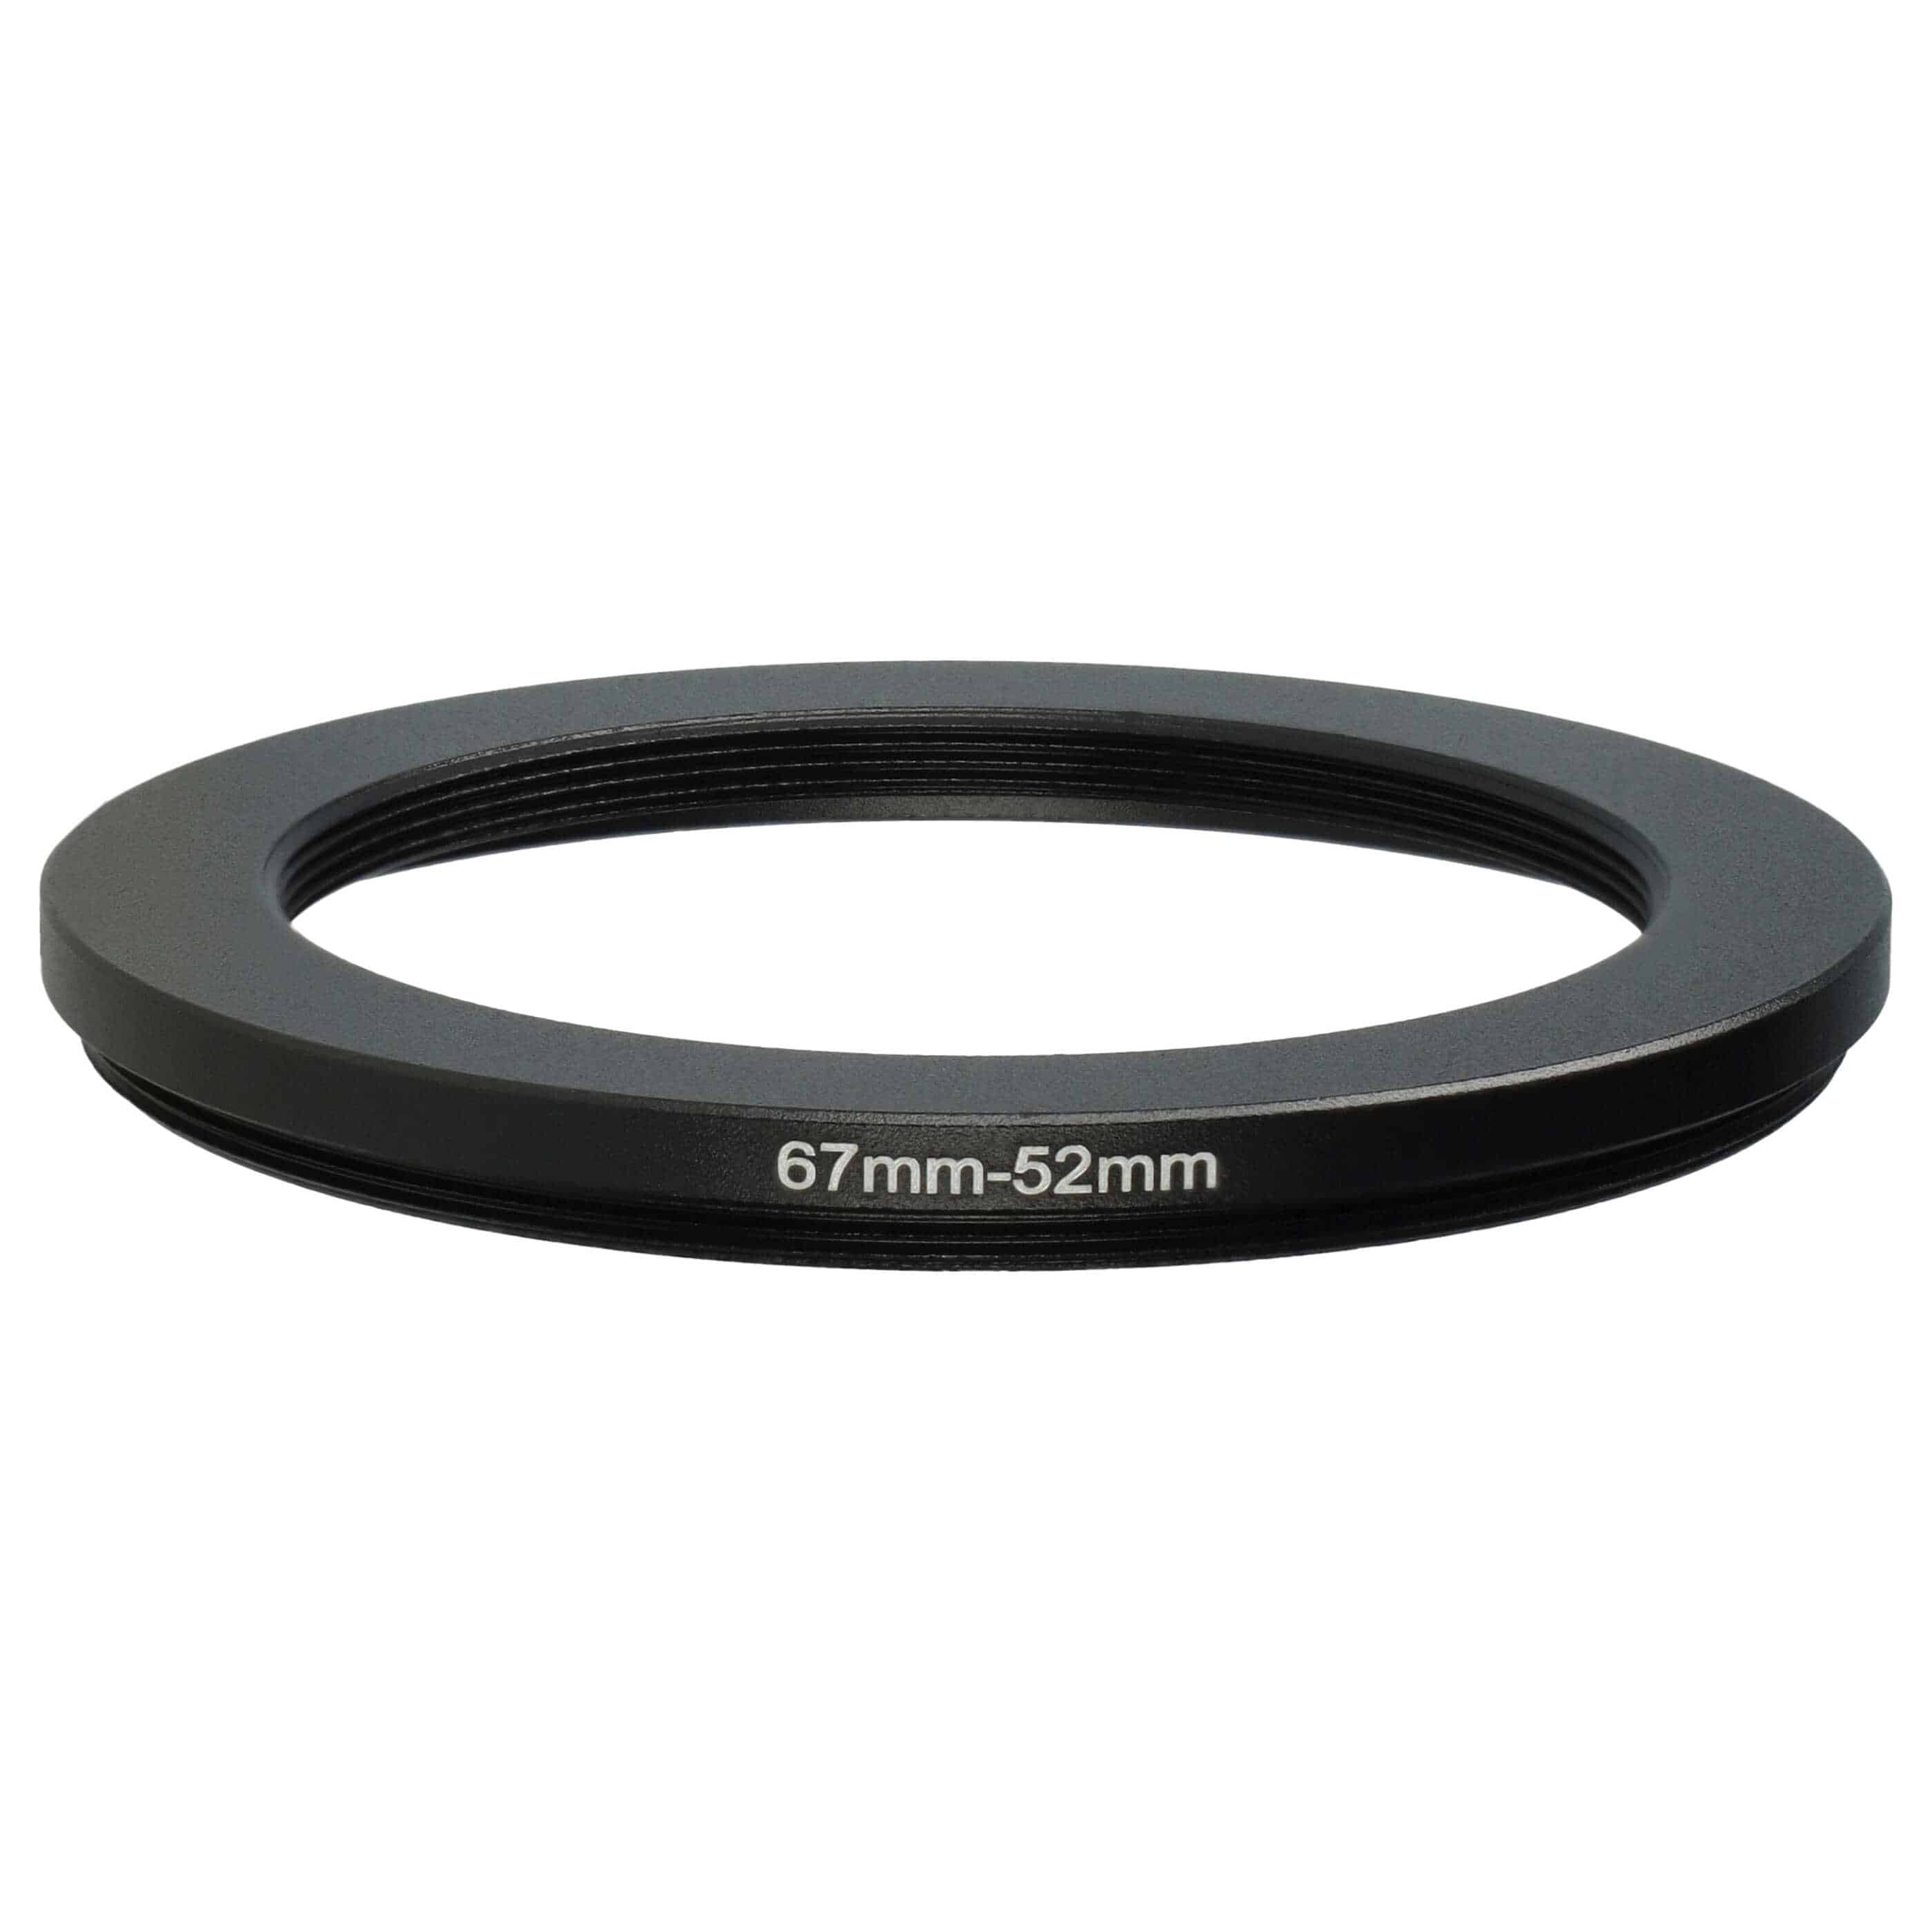 Step-Down Ring Adapter from 67 mm to 52 mm for various Camera Lenses